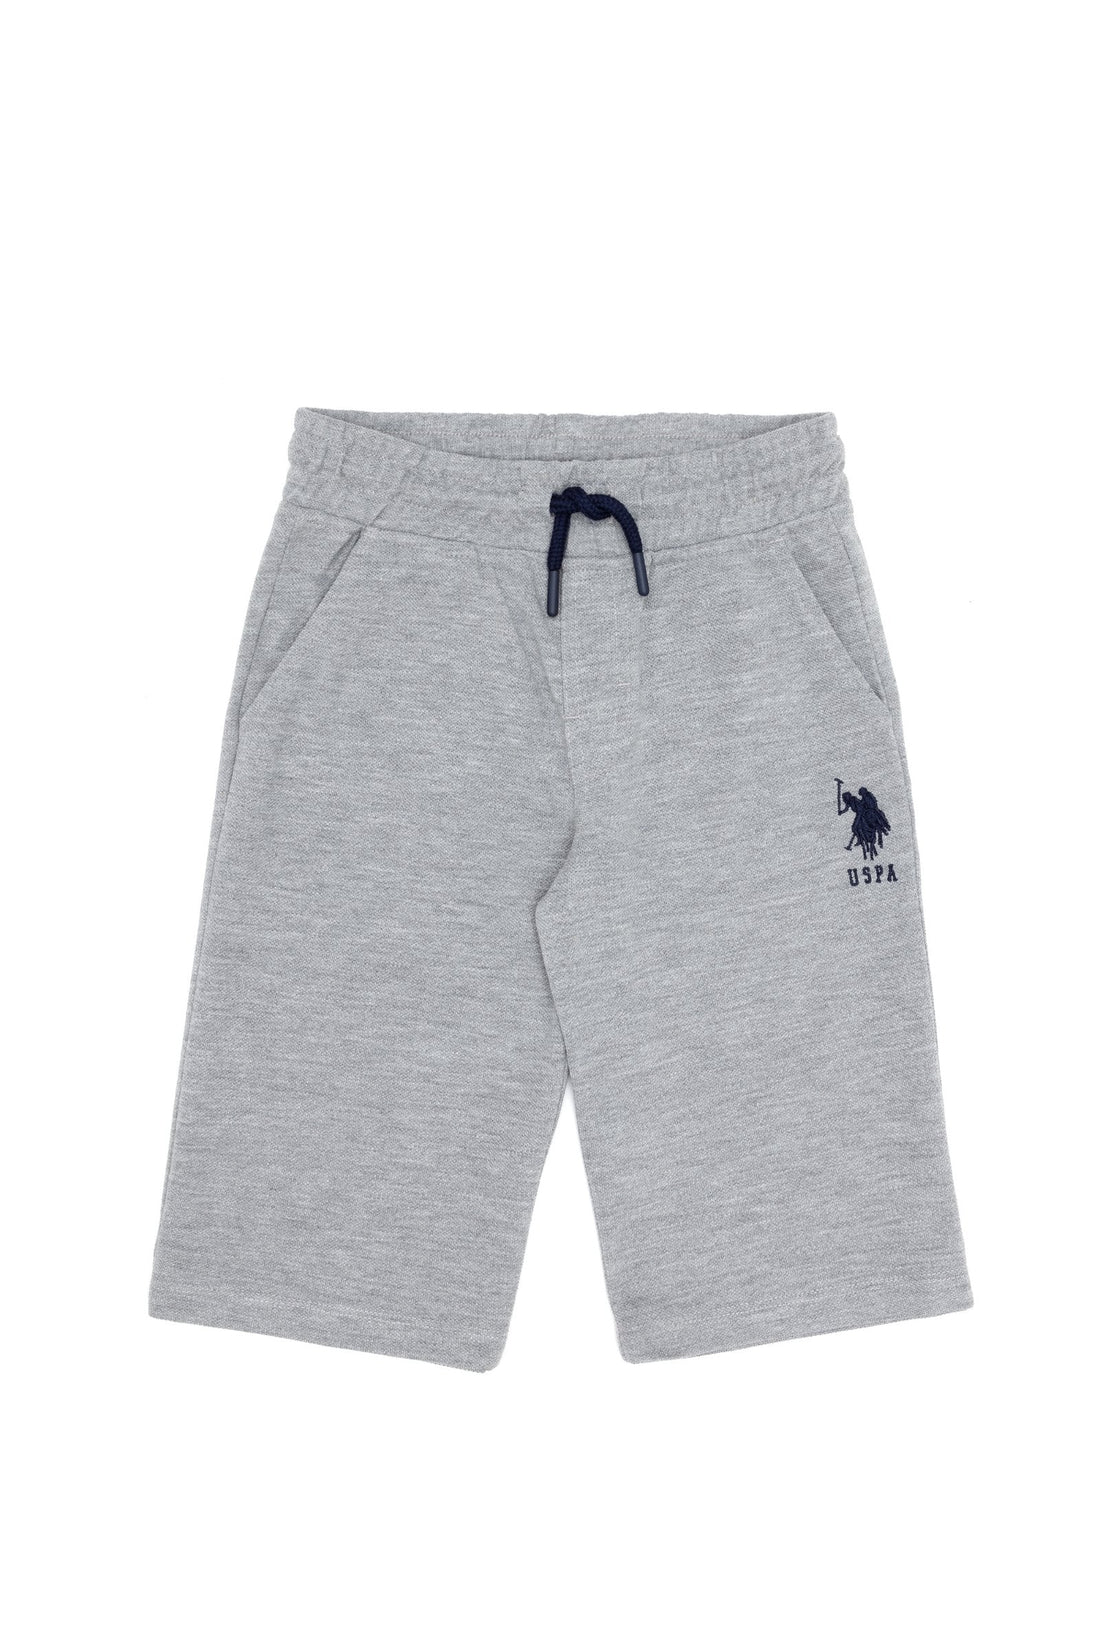 Grey Knitted Shorts With Black Drawstrings